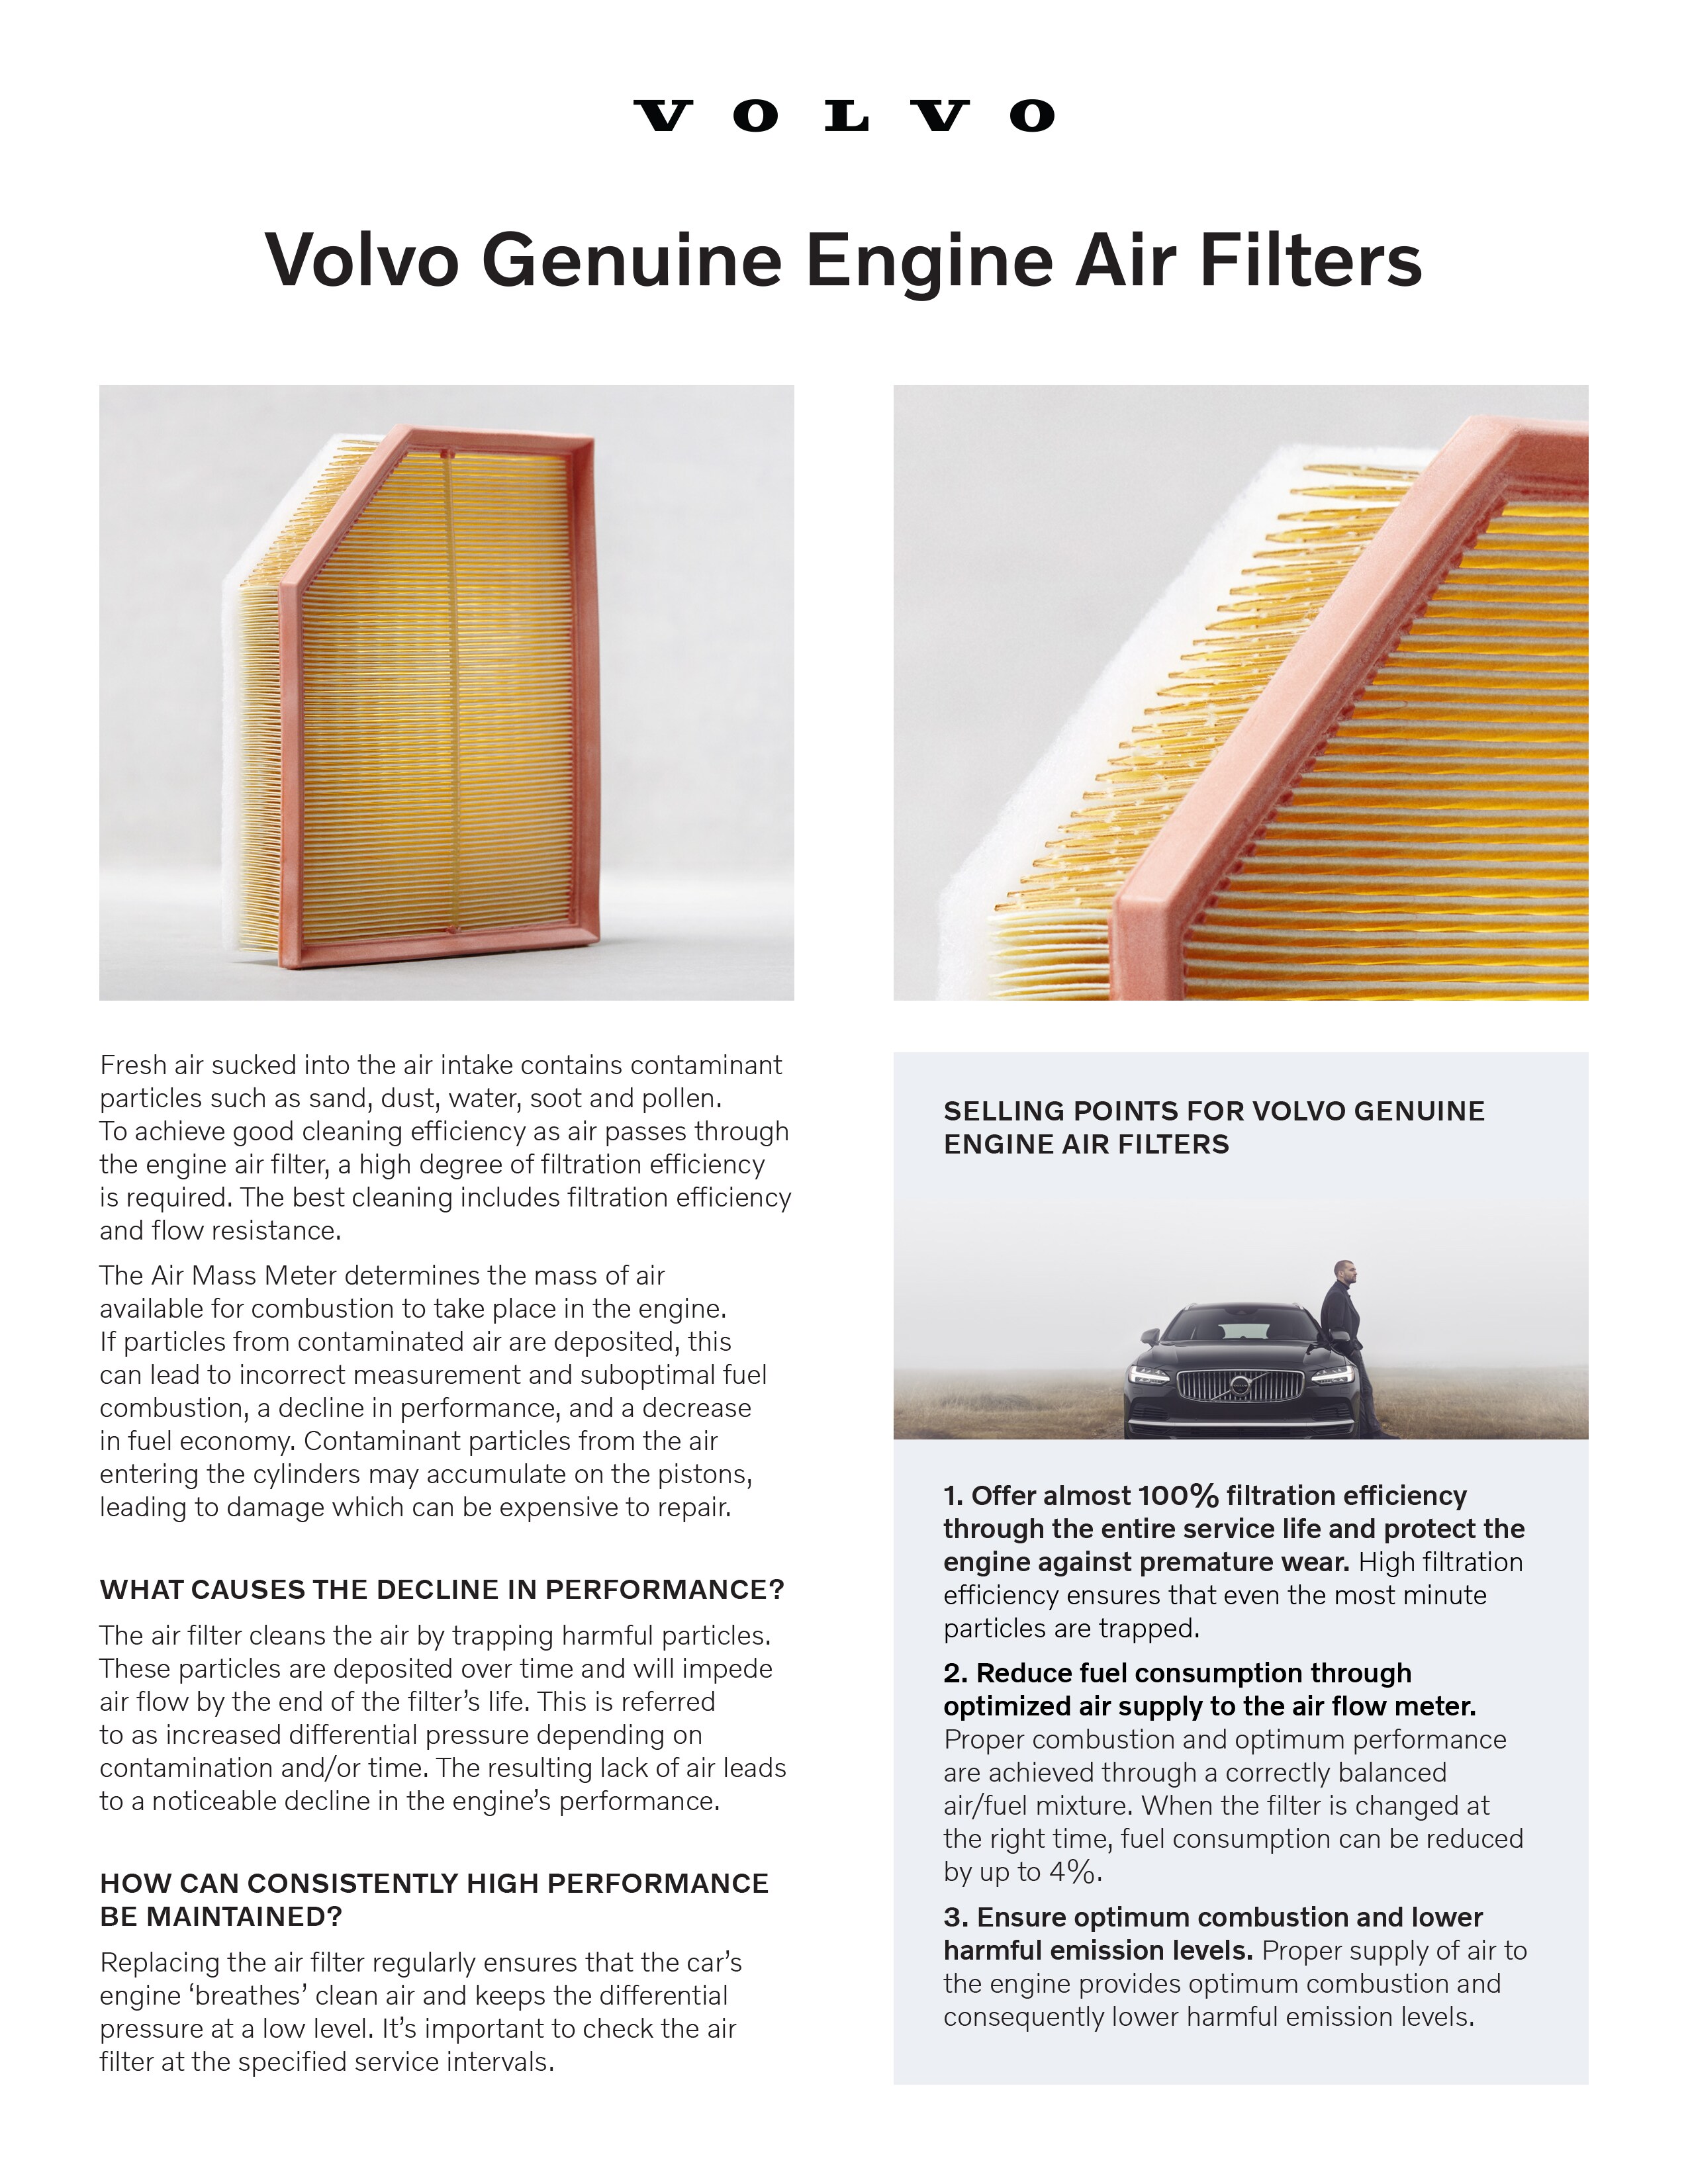 Research Volvo Genuine Engine Air Filter at Culver City Volvo Cars